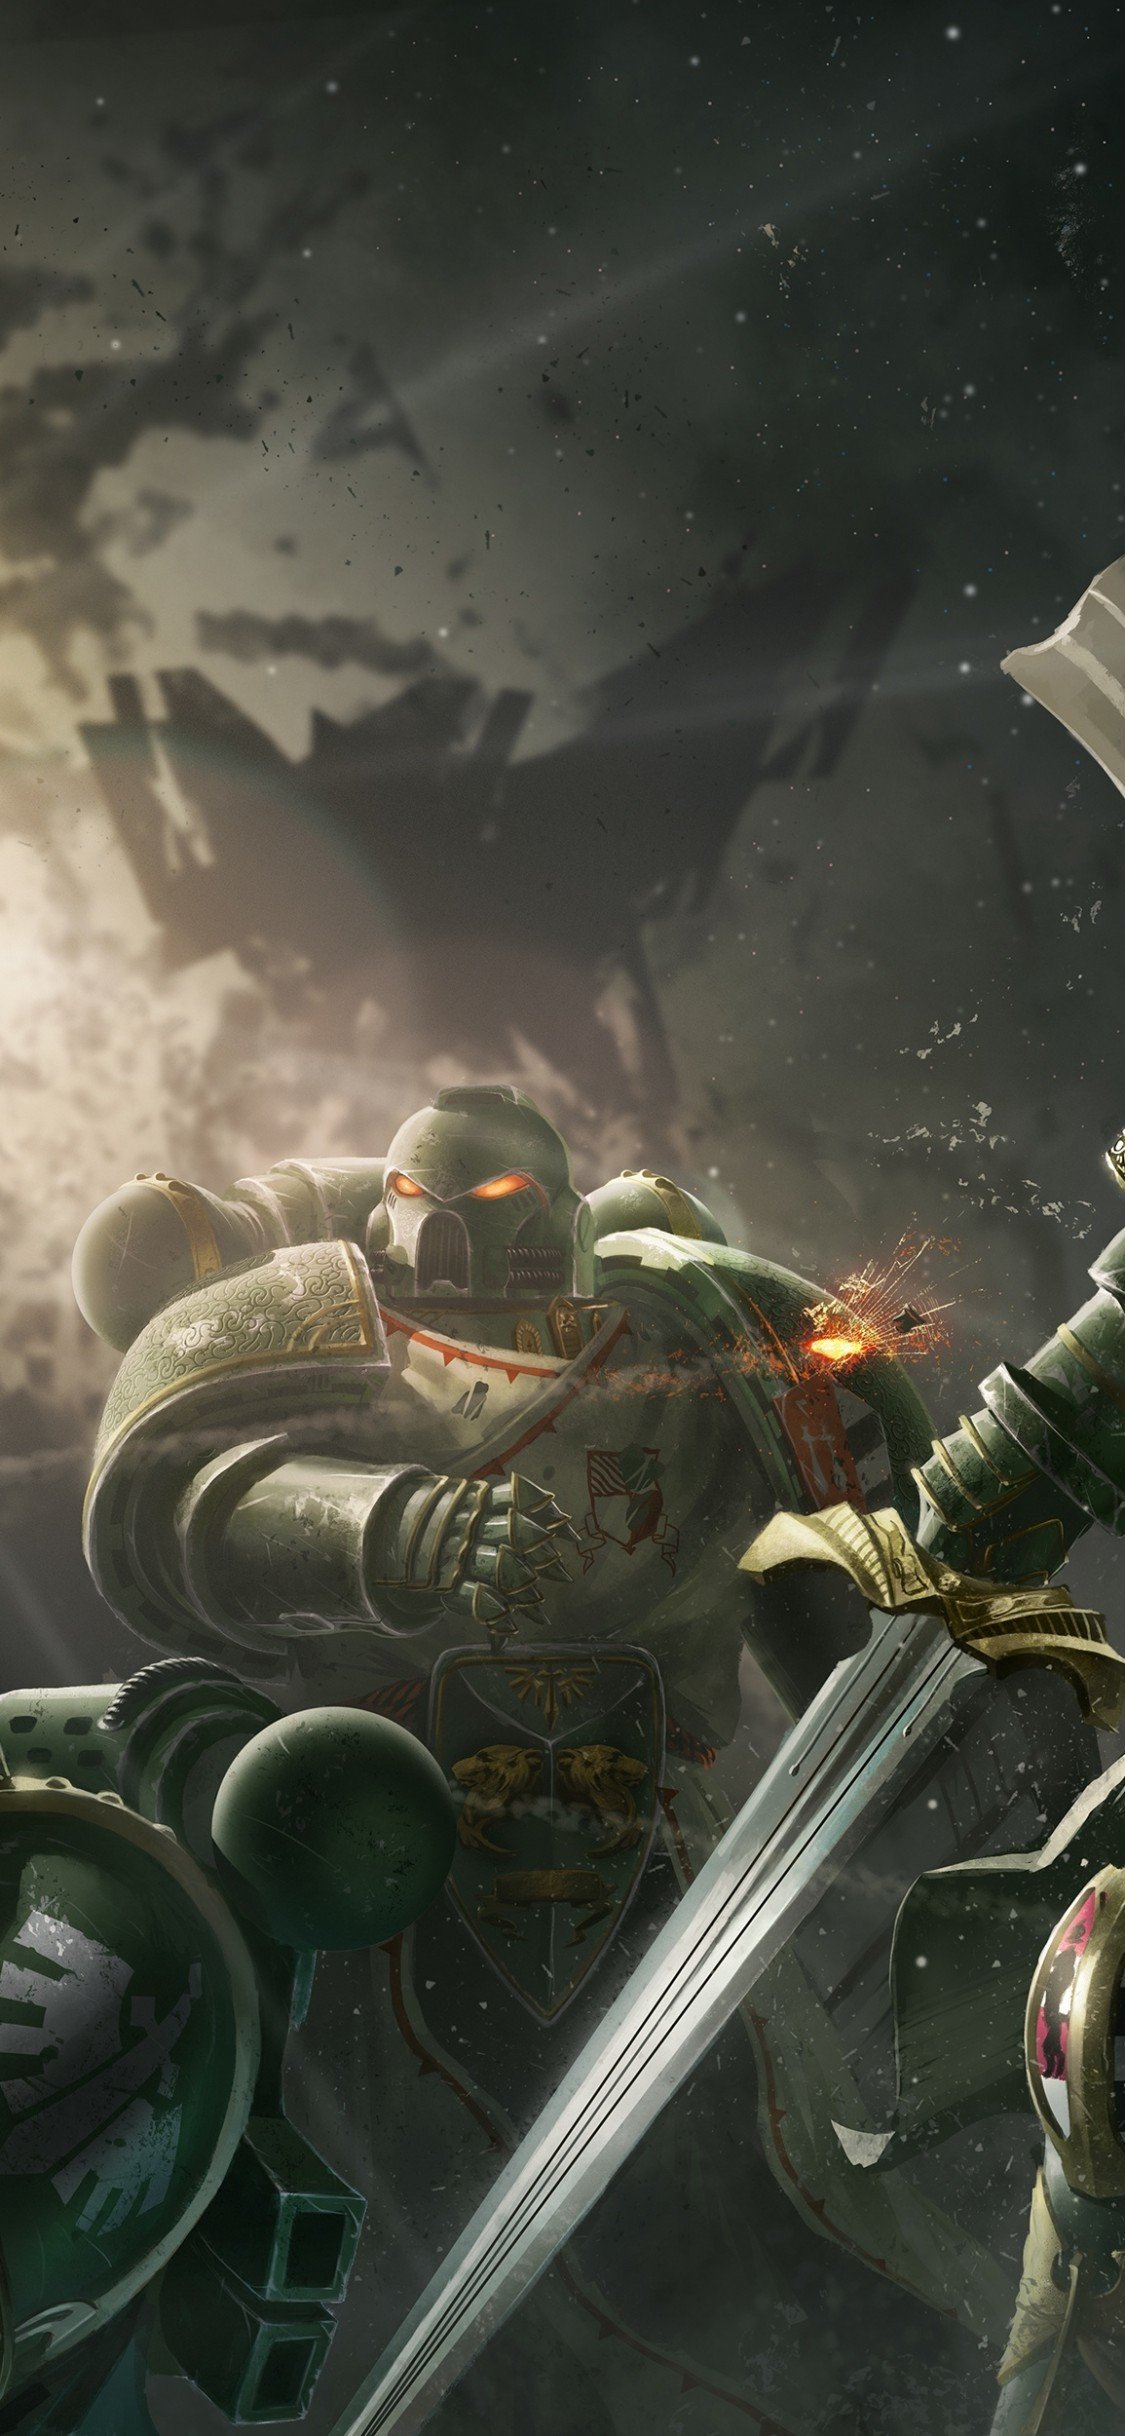 Download 1125x2436 Warhammer 40k, Armored, Guns, Sci Fi, Sword Wallpaper For IPhone 11 Pro & X